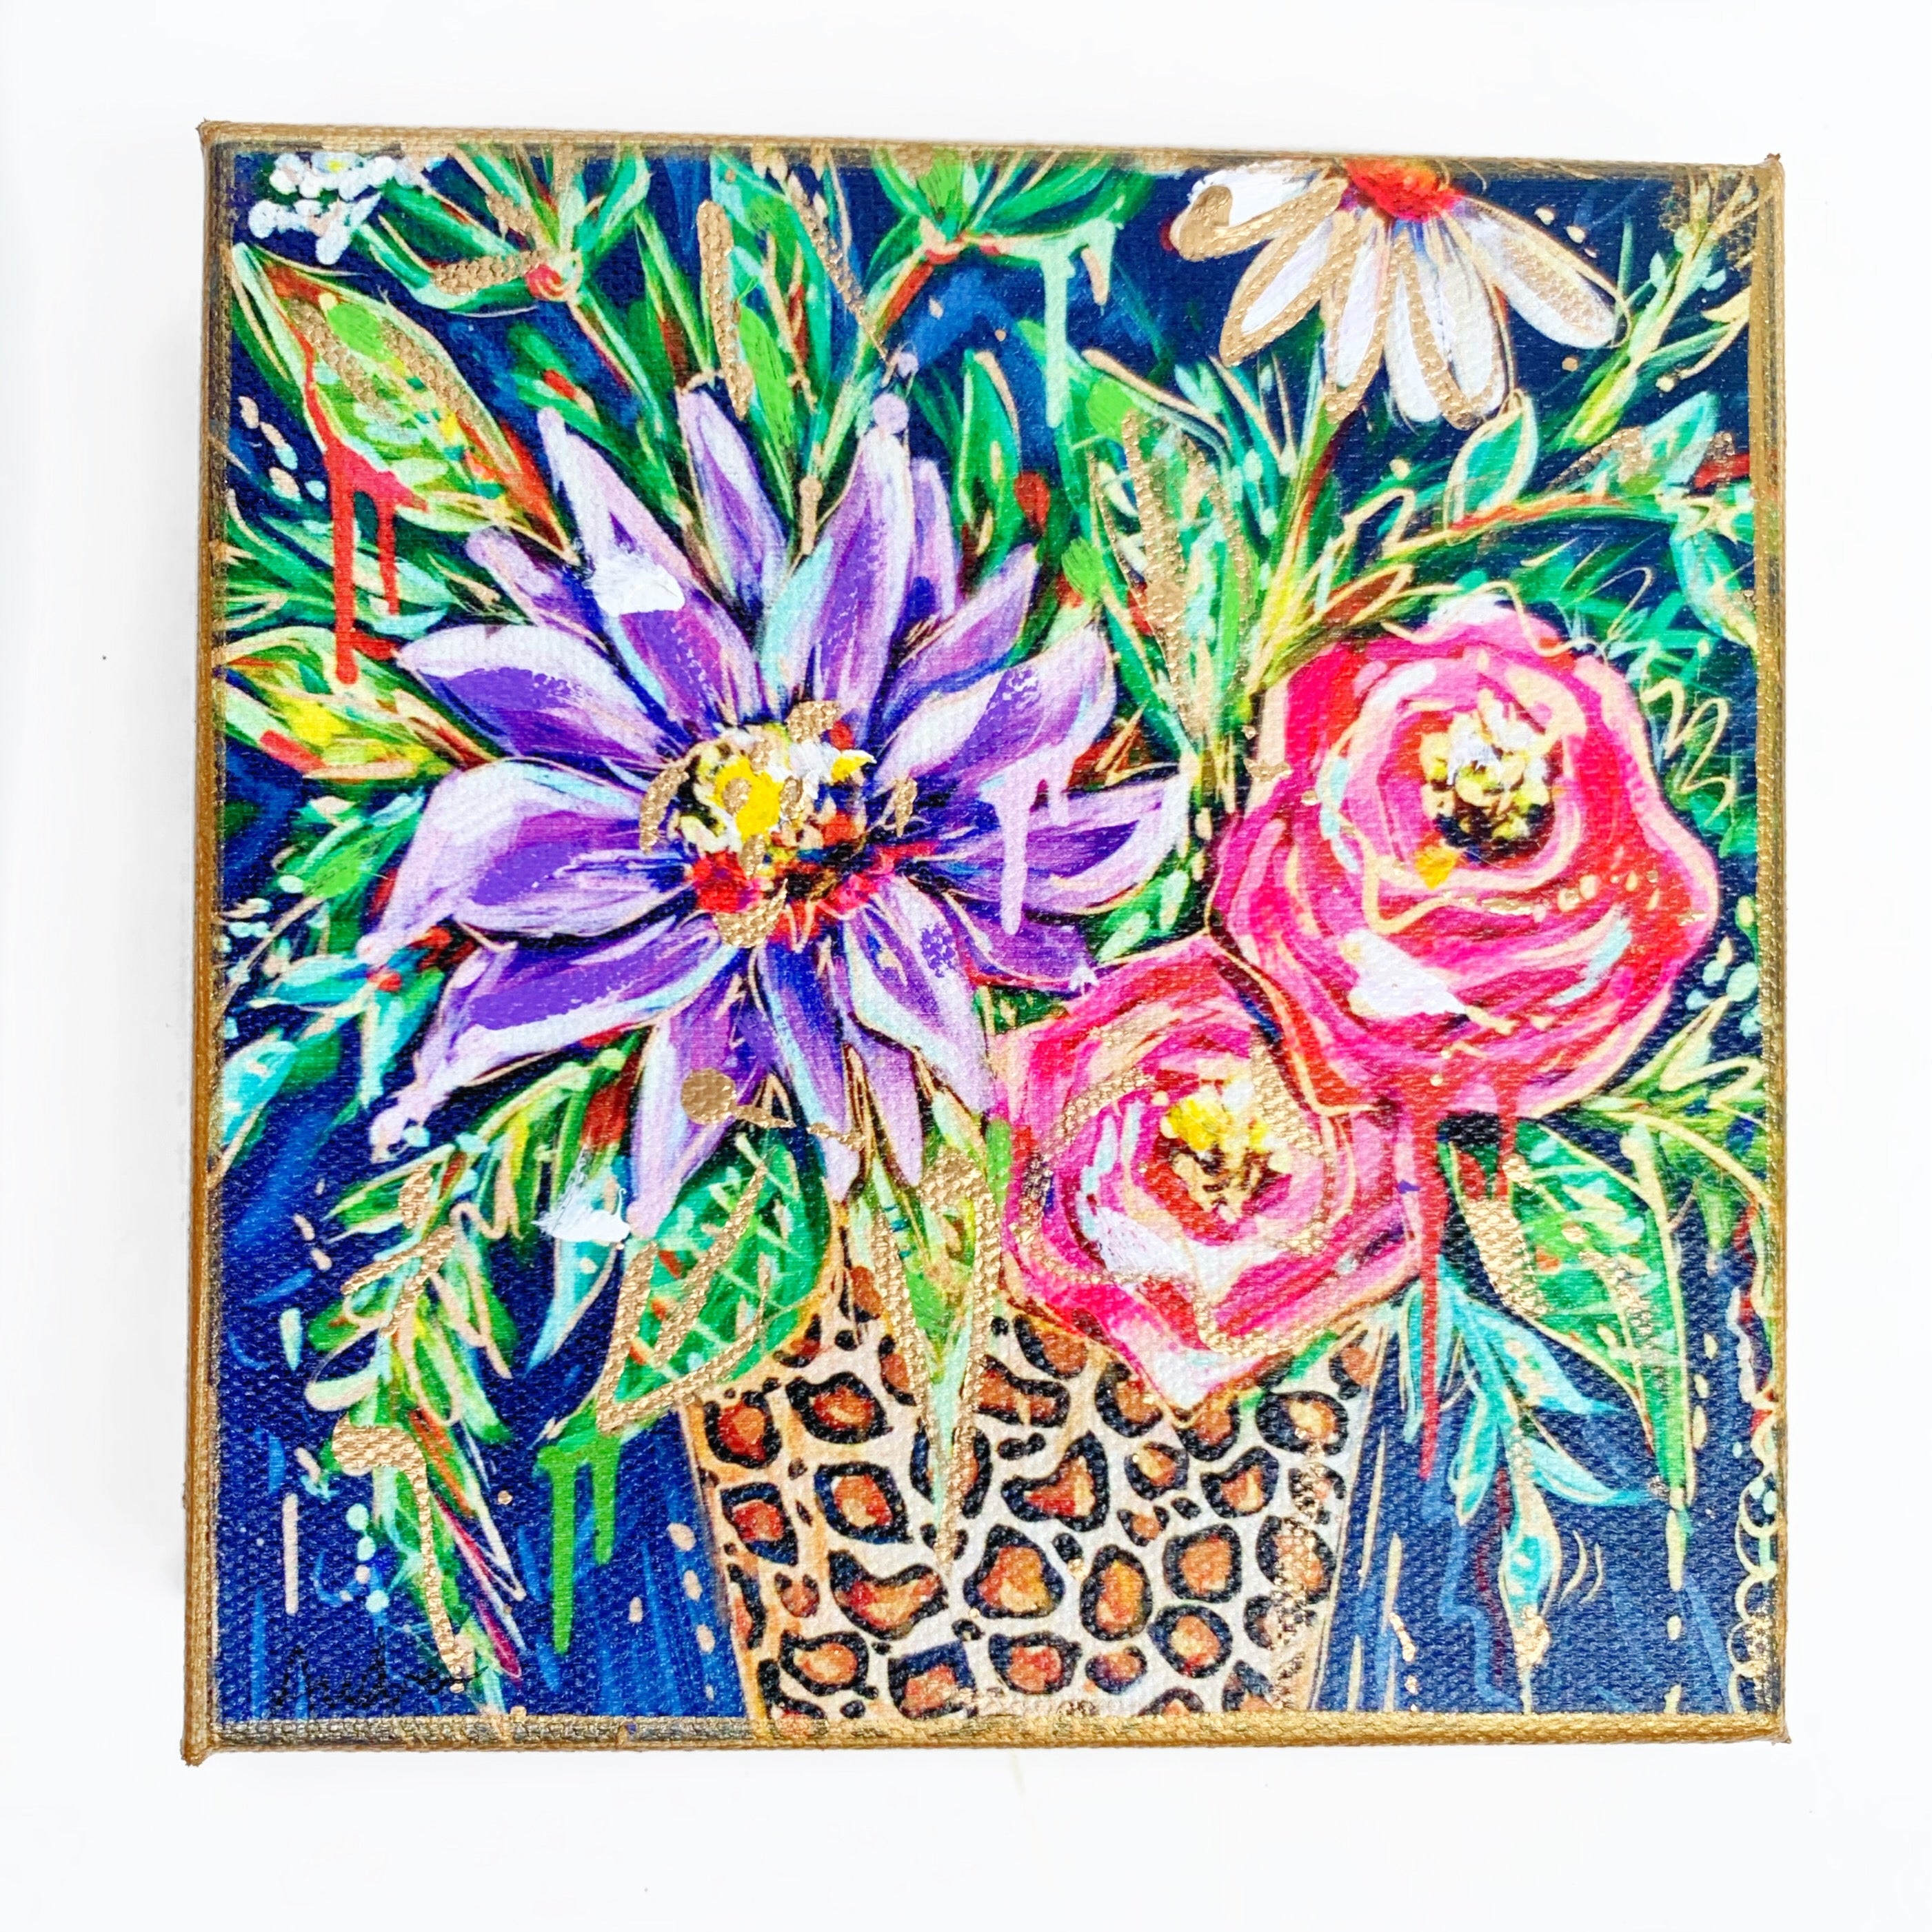 Floral Dark Background Leopard Vase on 6"x6" Gallery Wrapped Canvas